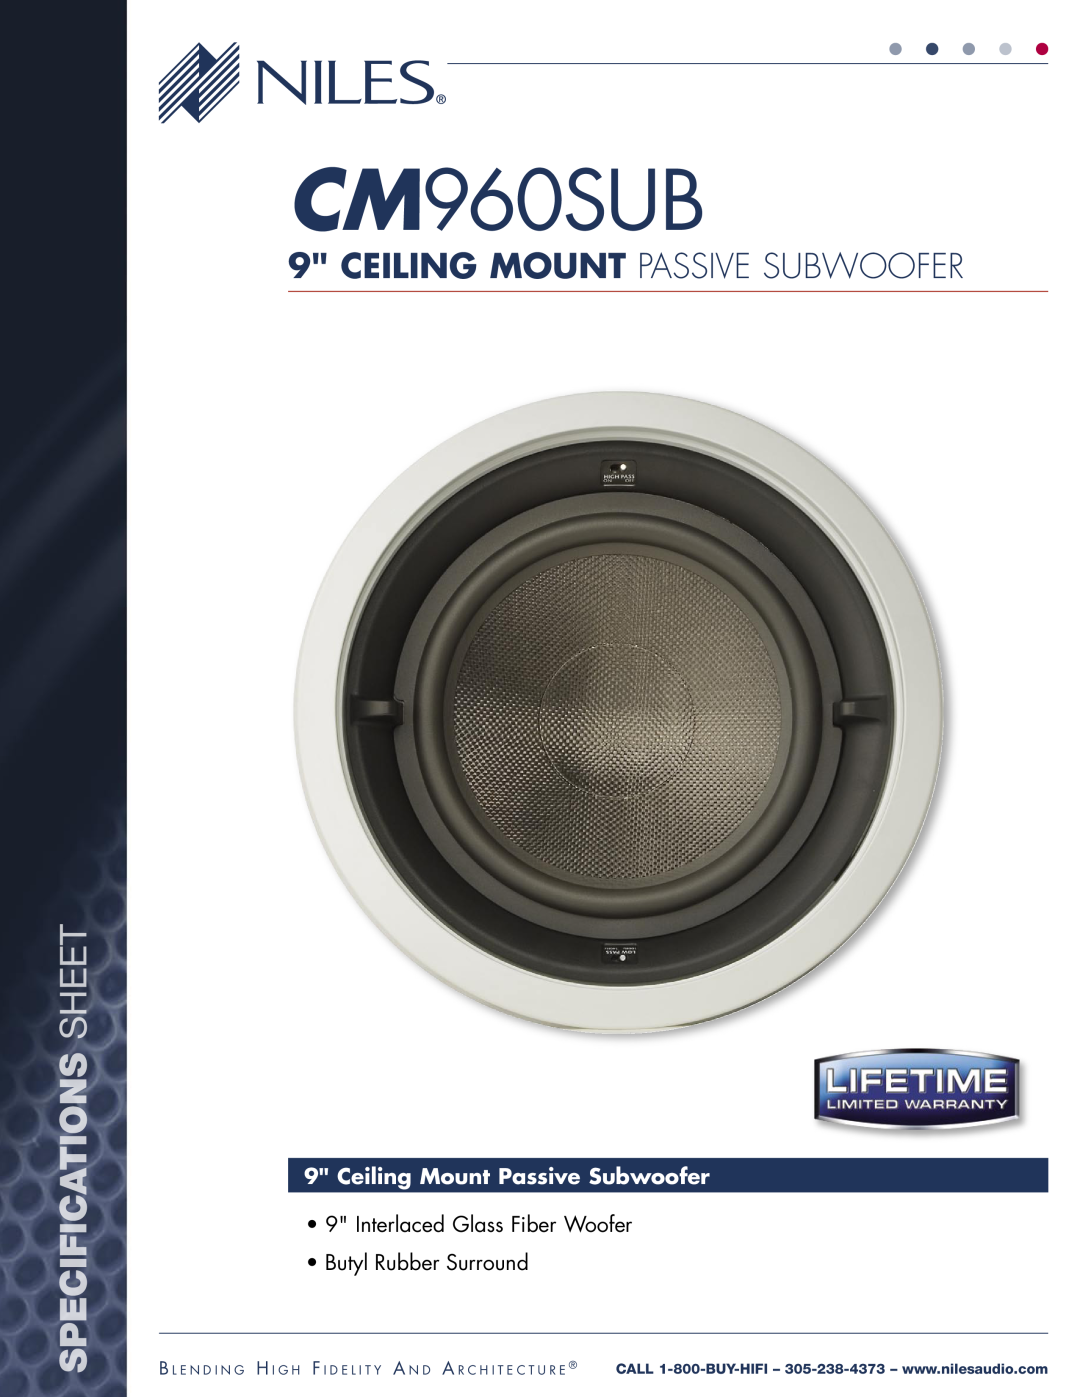 Niles Audio CM960SUB specifications Ceiling Mount Passive Subwoofer, Specifications Sheet, Interlaced Glass Fiber Woofer 